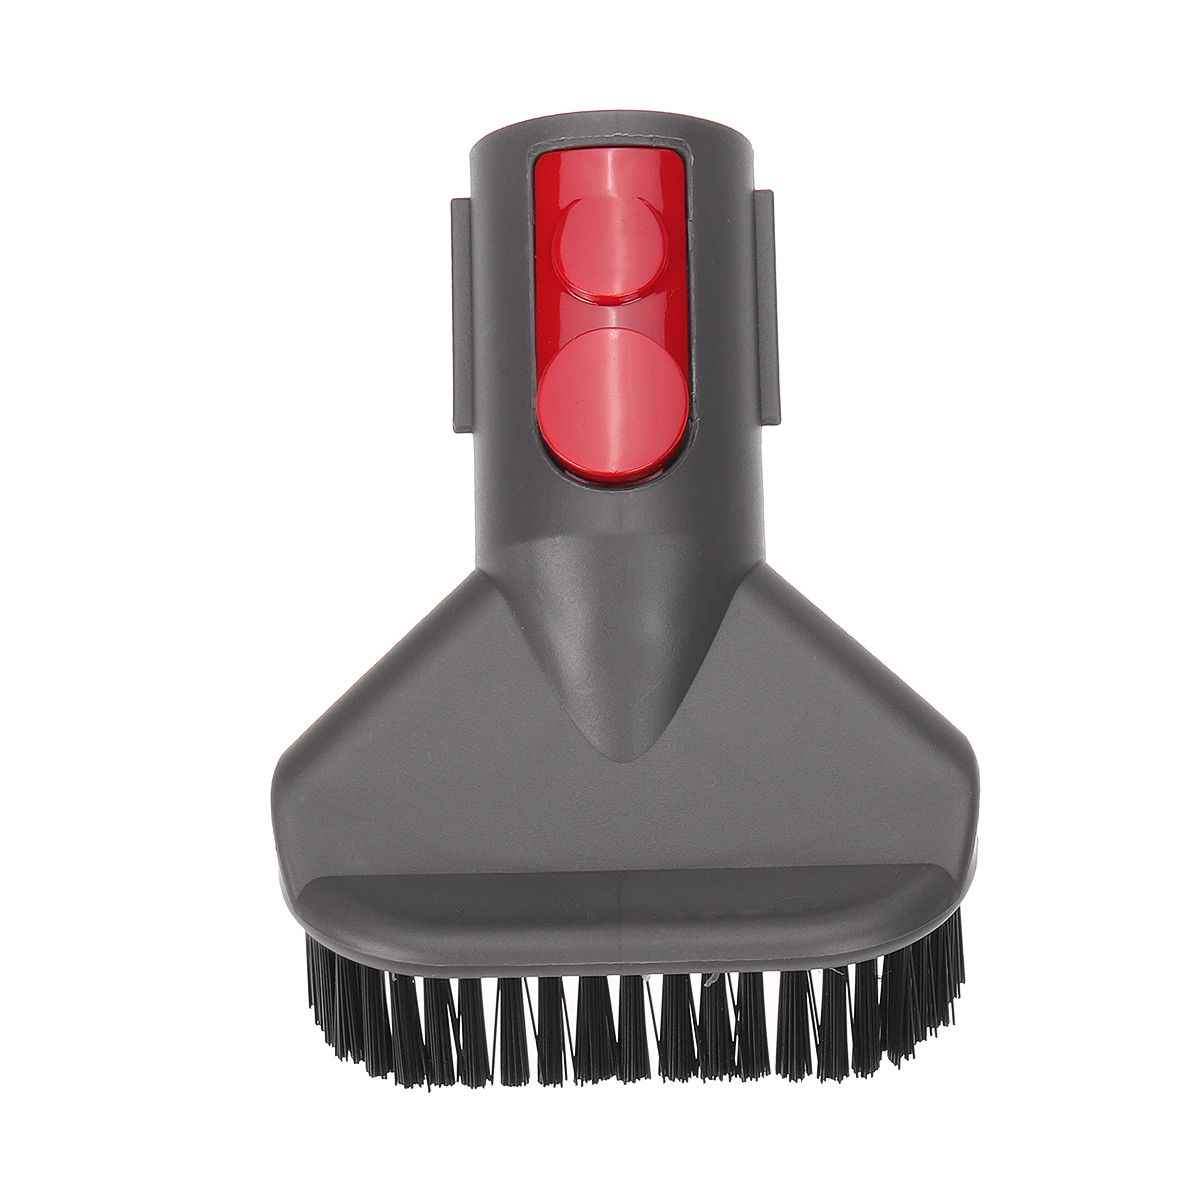 Find 5pcs Replacements for Dyson V7 V8 V10 V11 Vacuum Cleaner Hard Bristle Brush*2 Round Brush*1 Brush Head*2 [Not-original] for Sale on Gipsybee.com with cryptocurrencies